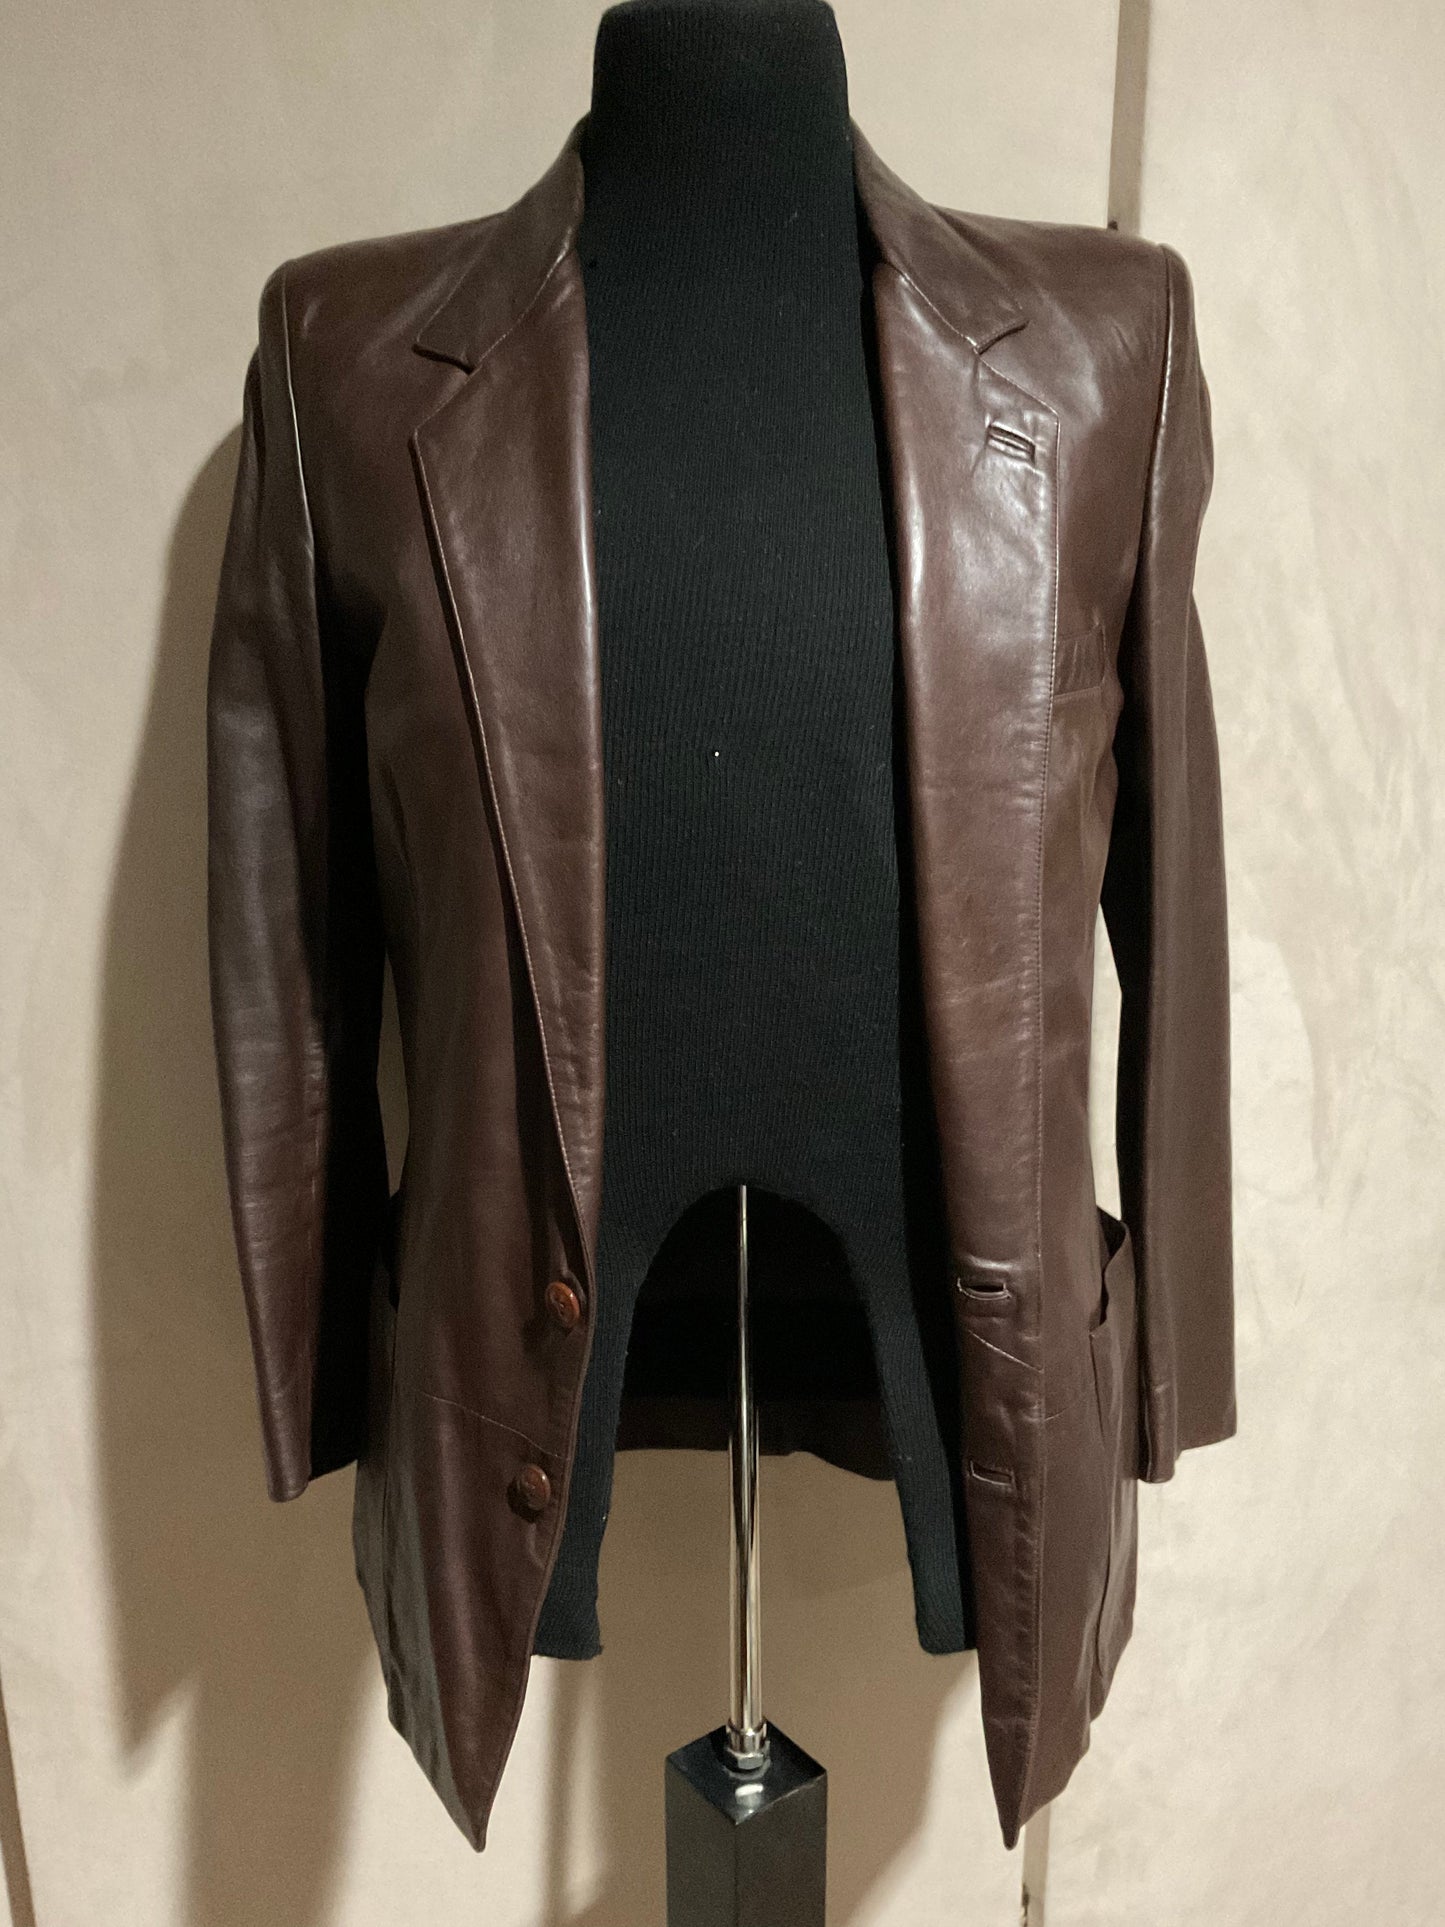 R P LEATHER BLAZER JACKET / BROWN / MEDIUM / MADE IN ITALY